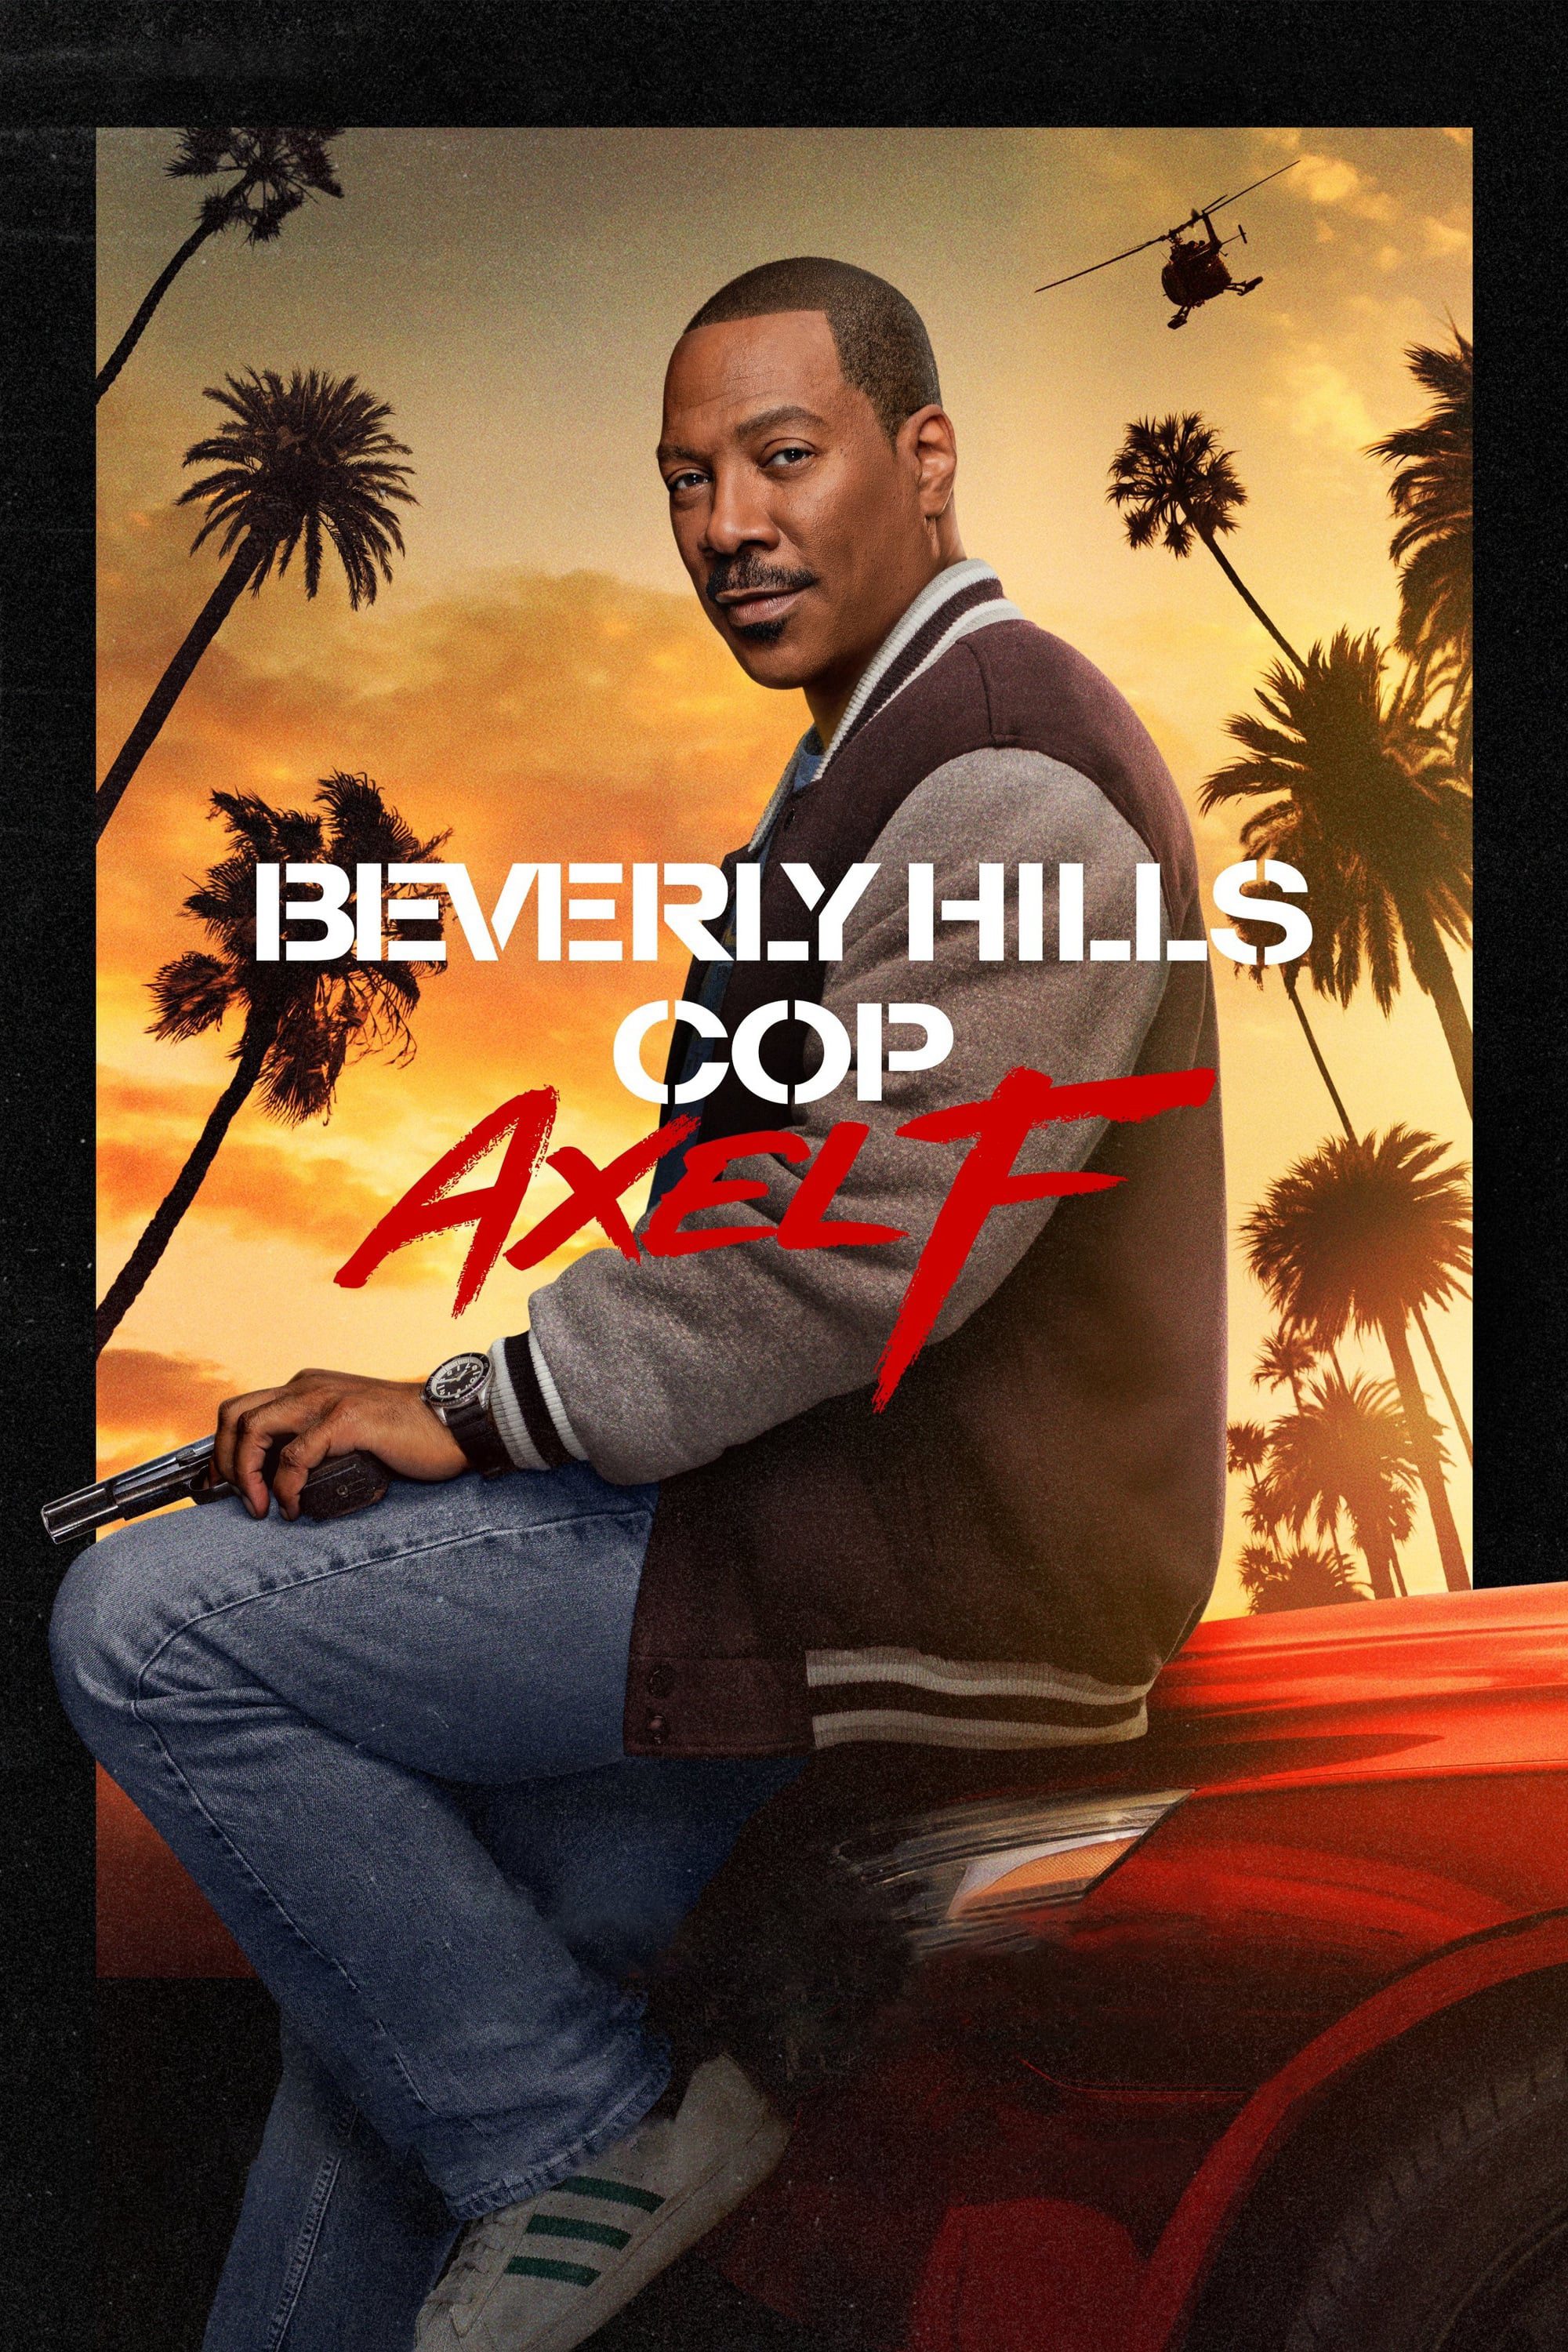 Banner Phim Cảnh Sát Beverly Hills: Axel F (Beverly Hills Cop: Axel F)